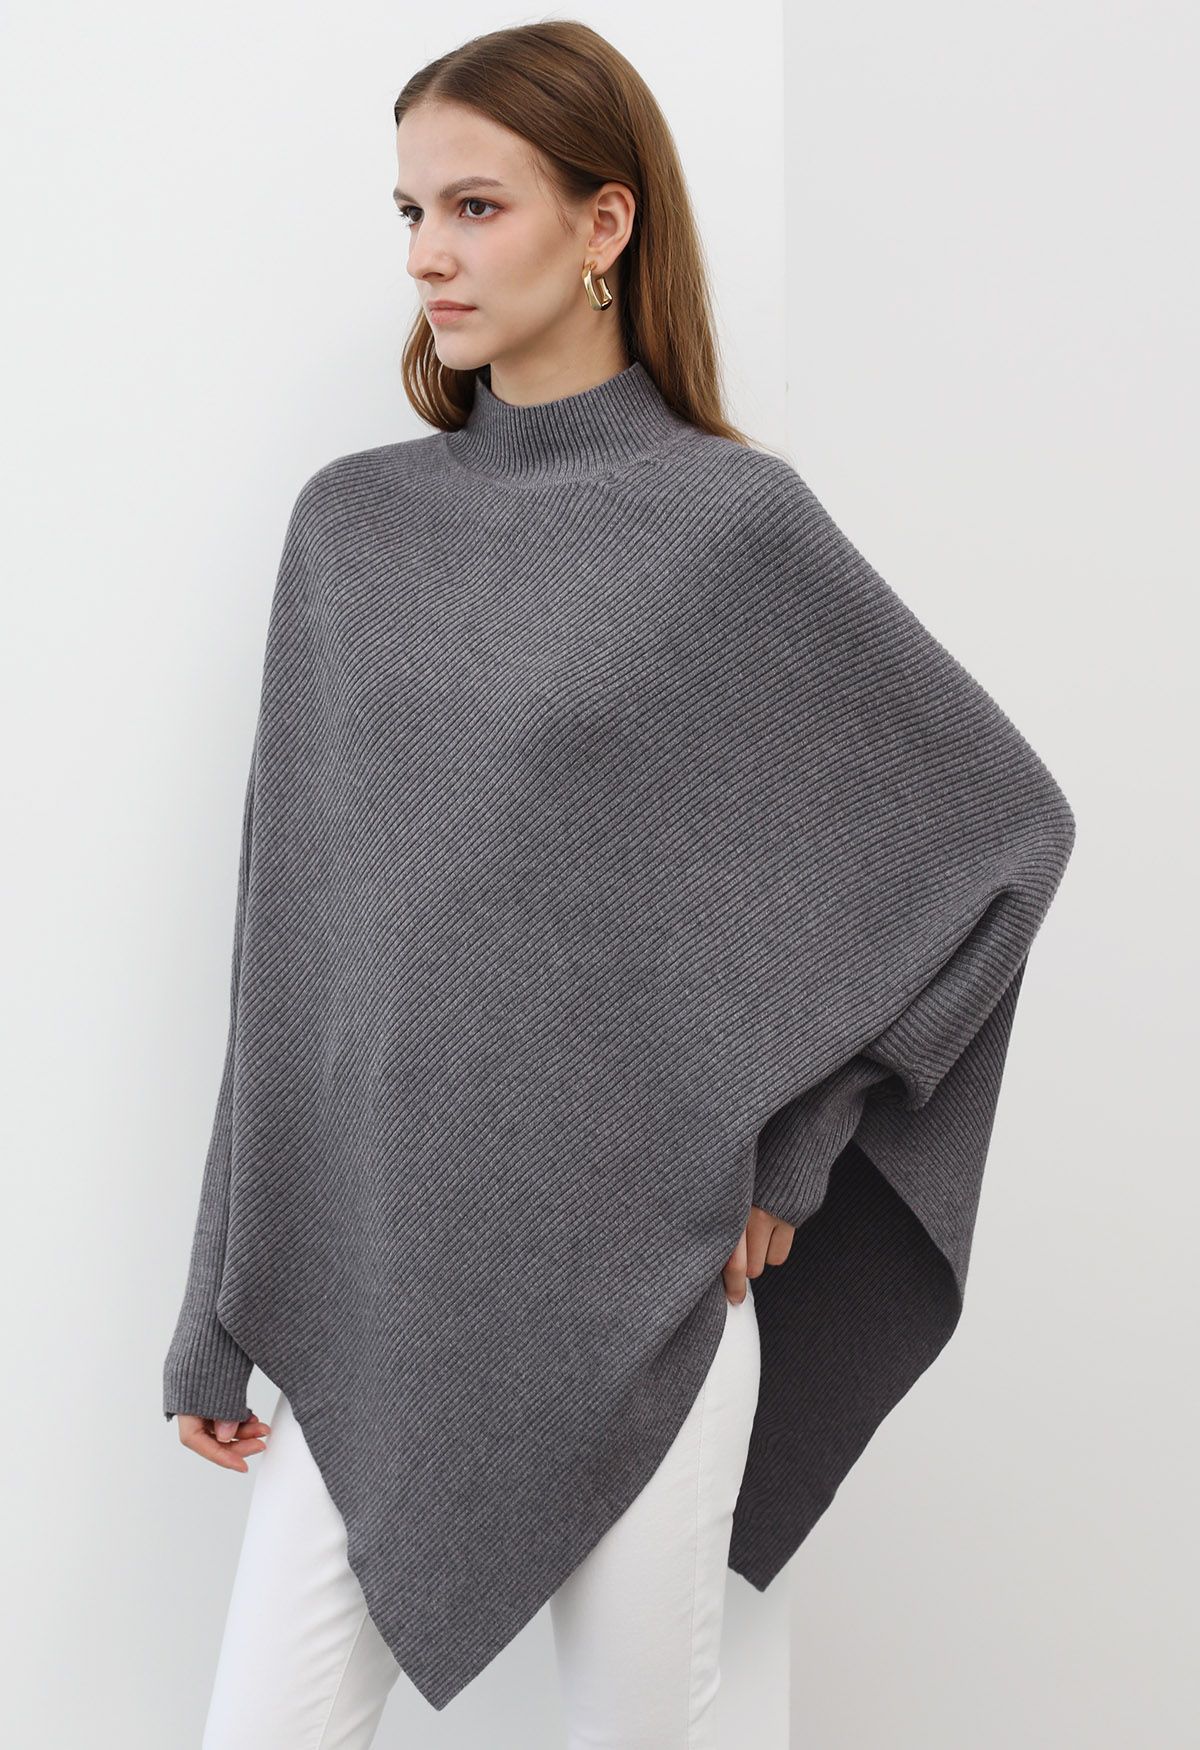 Asymmetric Batwing Sleeve Ribbed Knit Poncho in Grey - Retro, Indie and  Unique Fashion